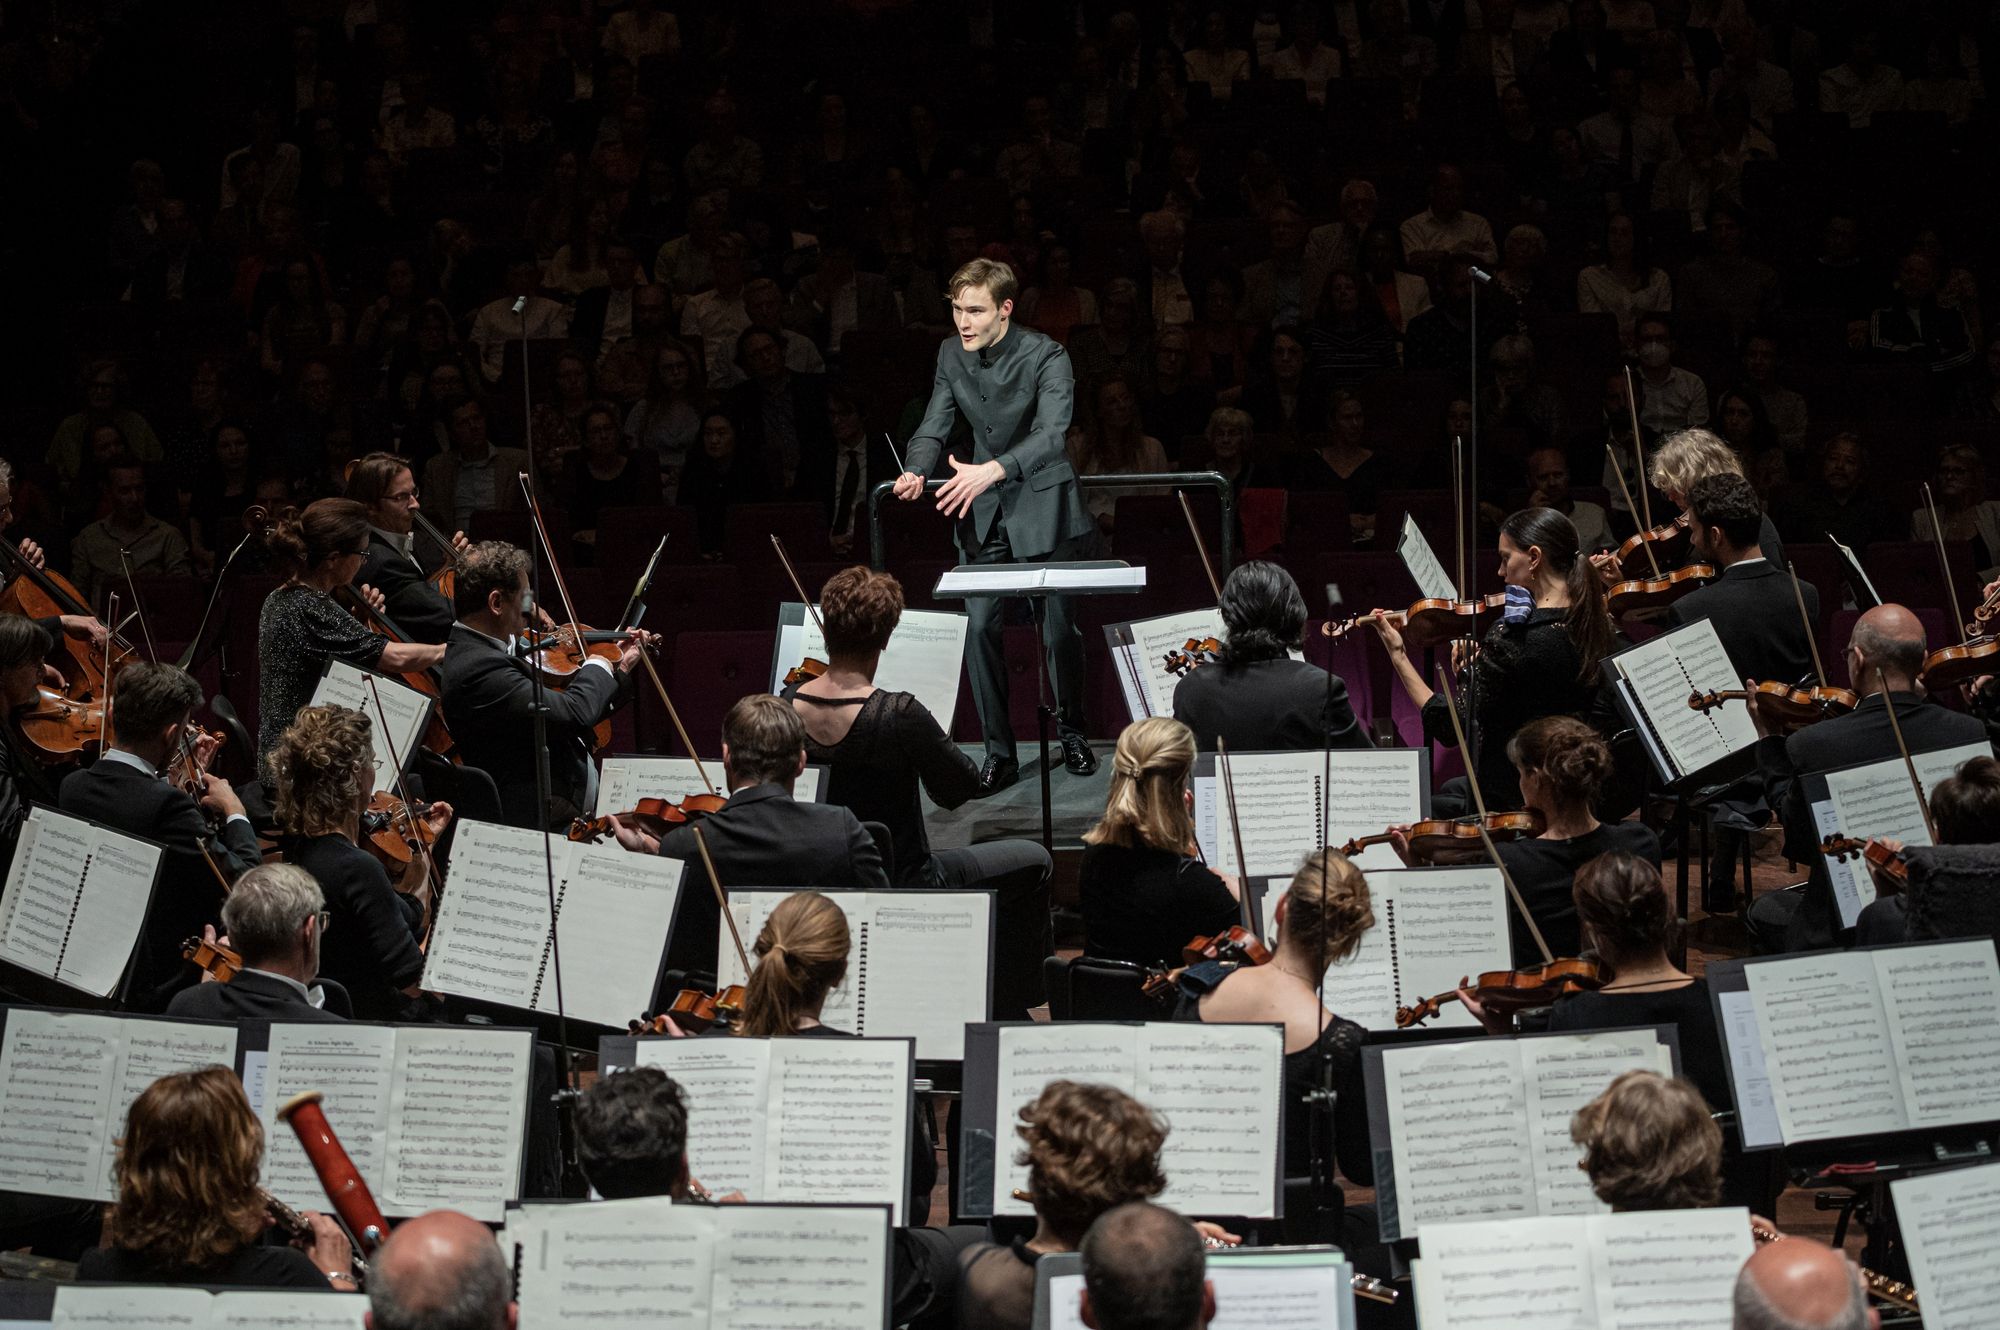 News item: Rotterdam's Conducting Competition